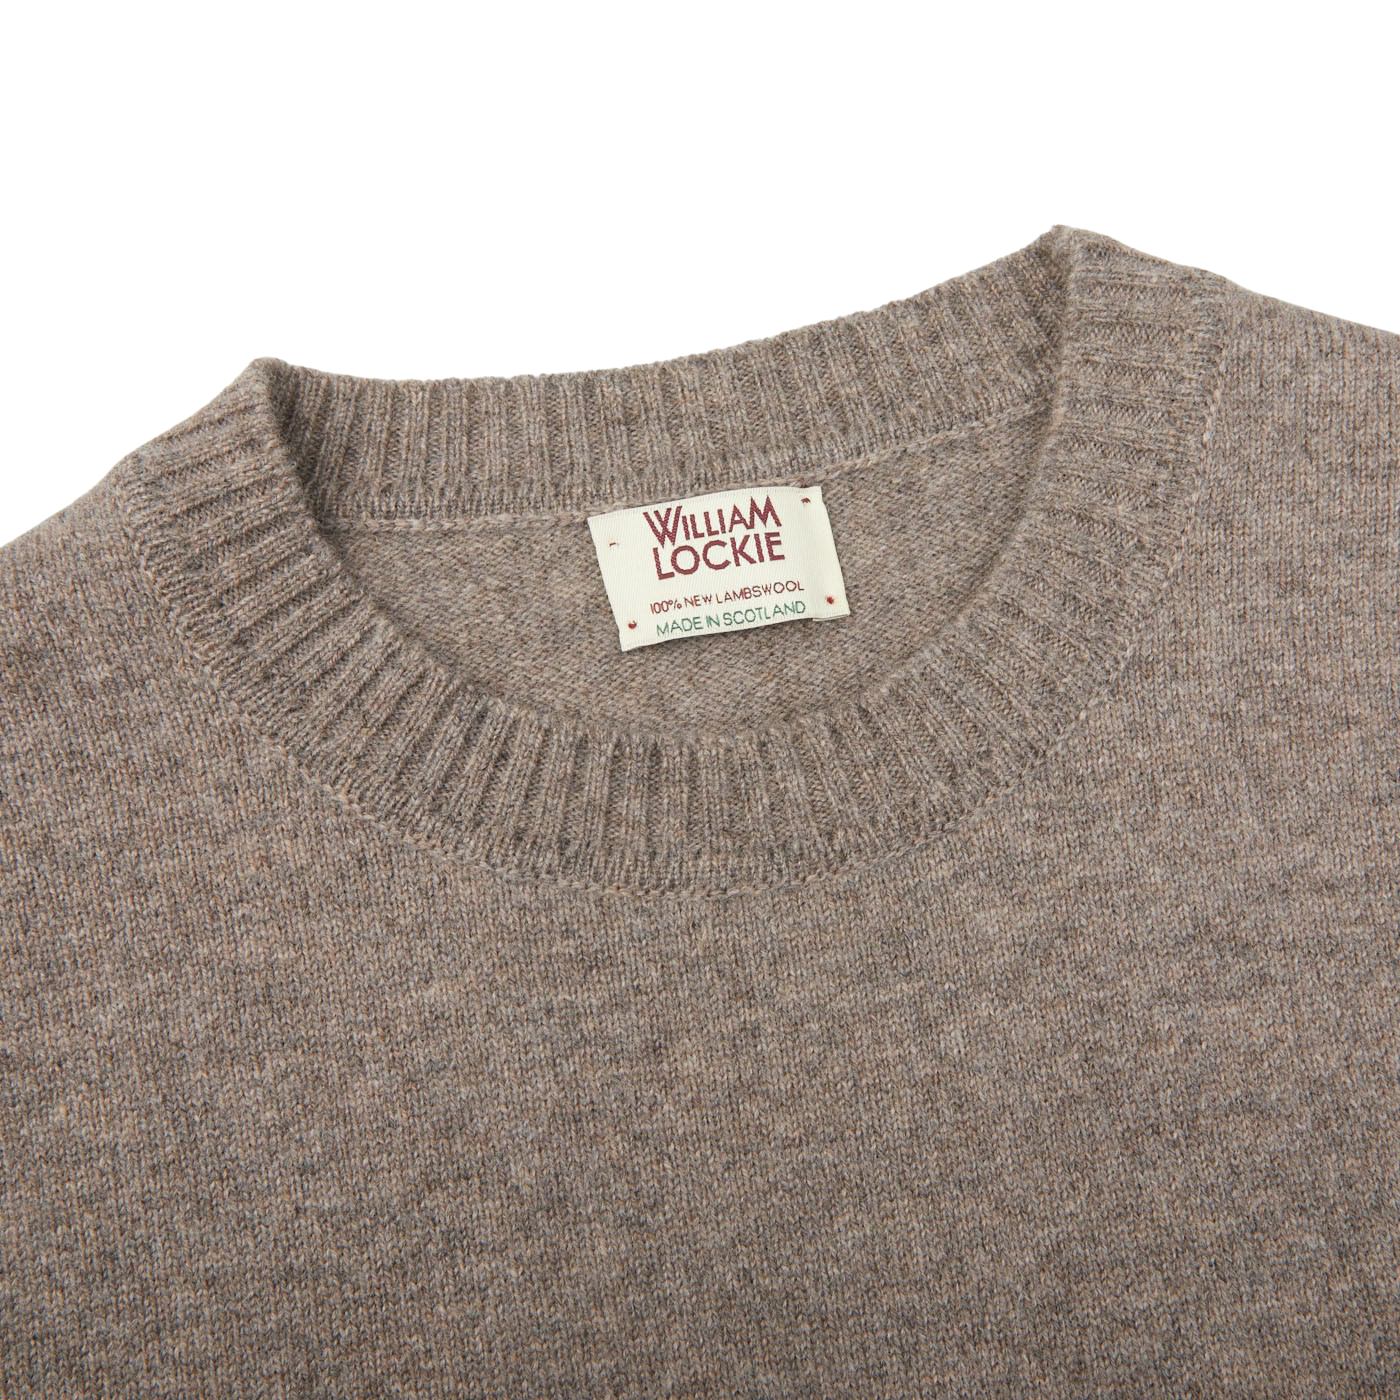 A comfy William Lockie Vole Beige Crew Neck Lambswool Sweater with a label on it.